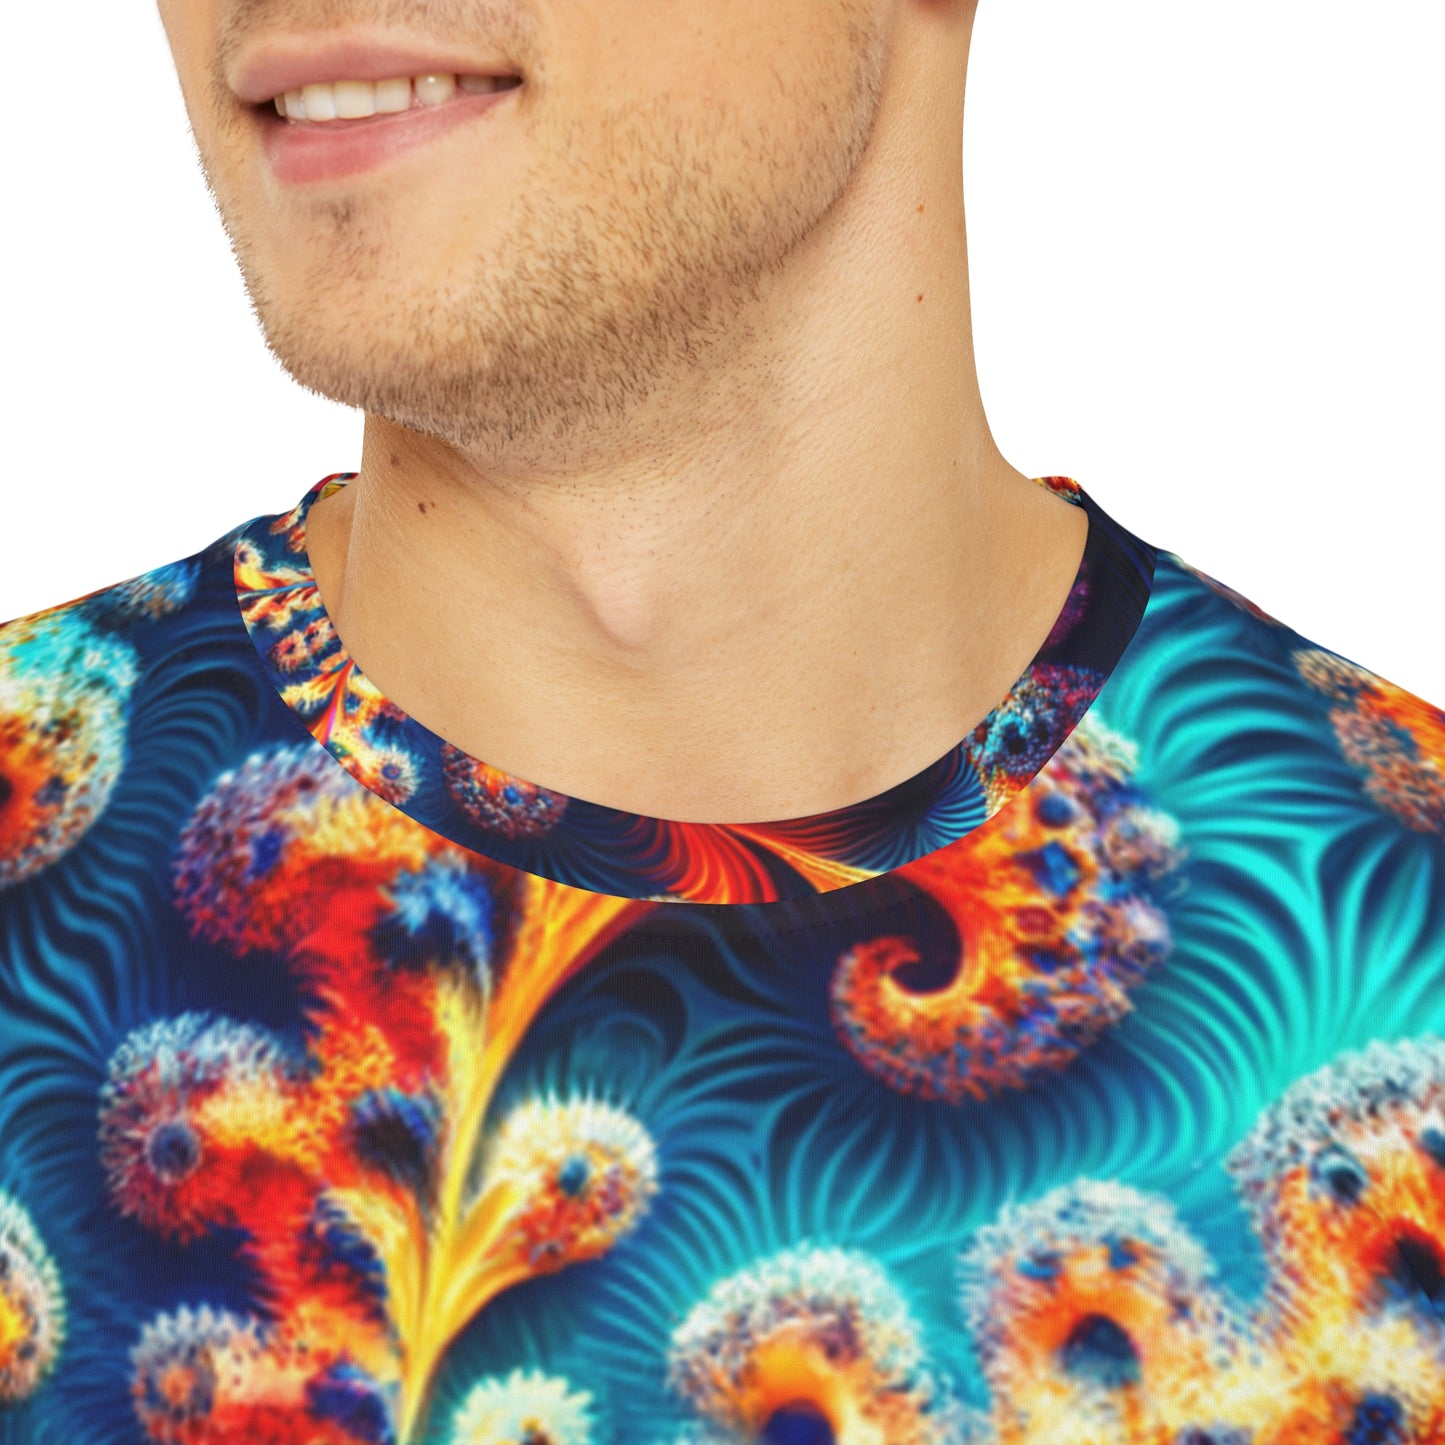 Close-up shot of the Iridescent Nautilus Swirls Crewneck Pullover All-Over Print Short-Sleeved Shirt blue red yellow orange green swirl pattern worn by a white man